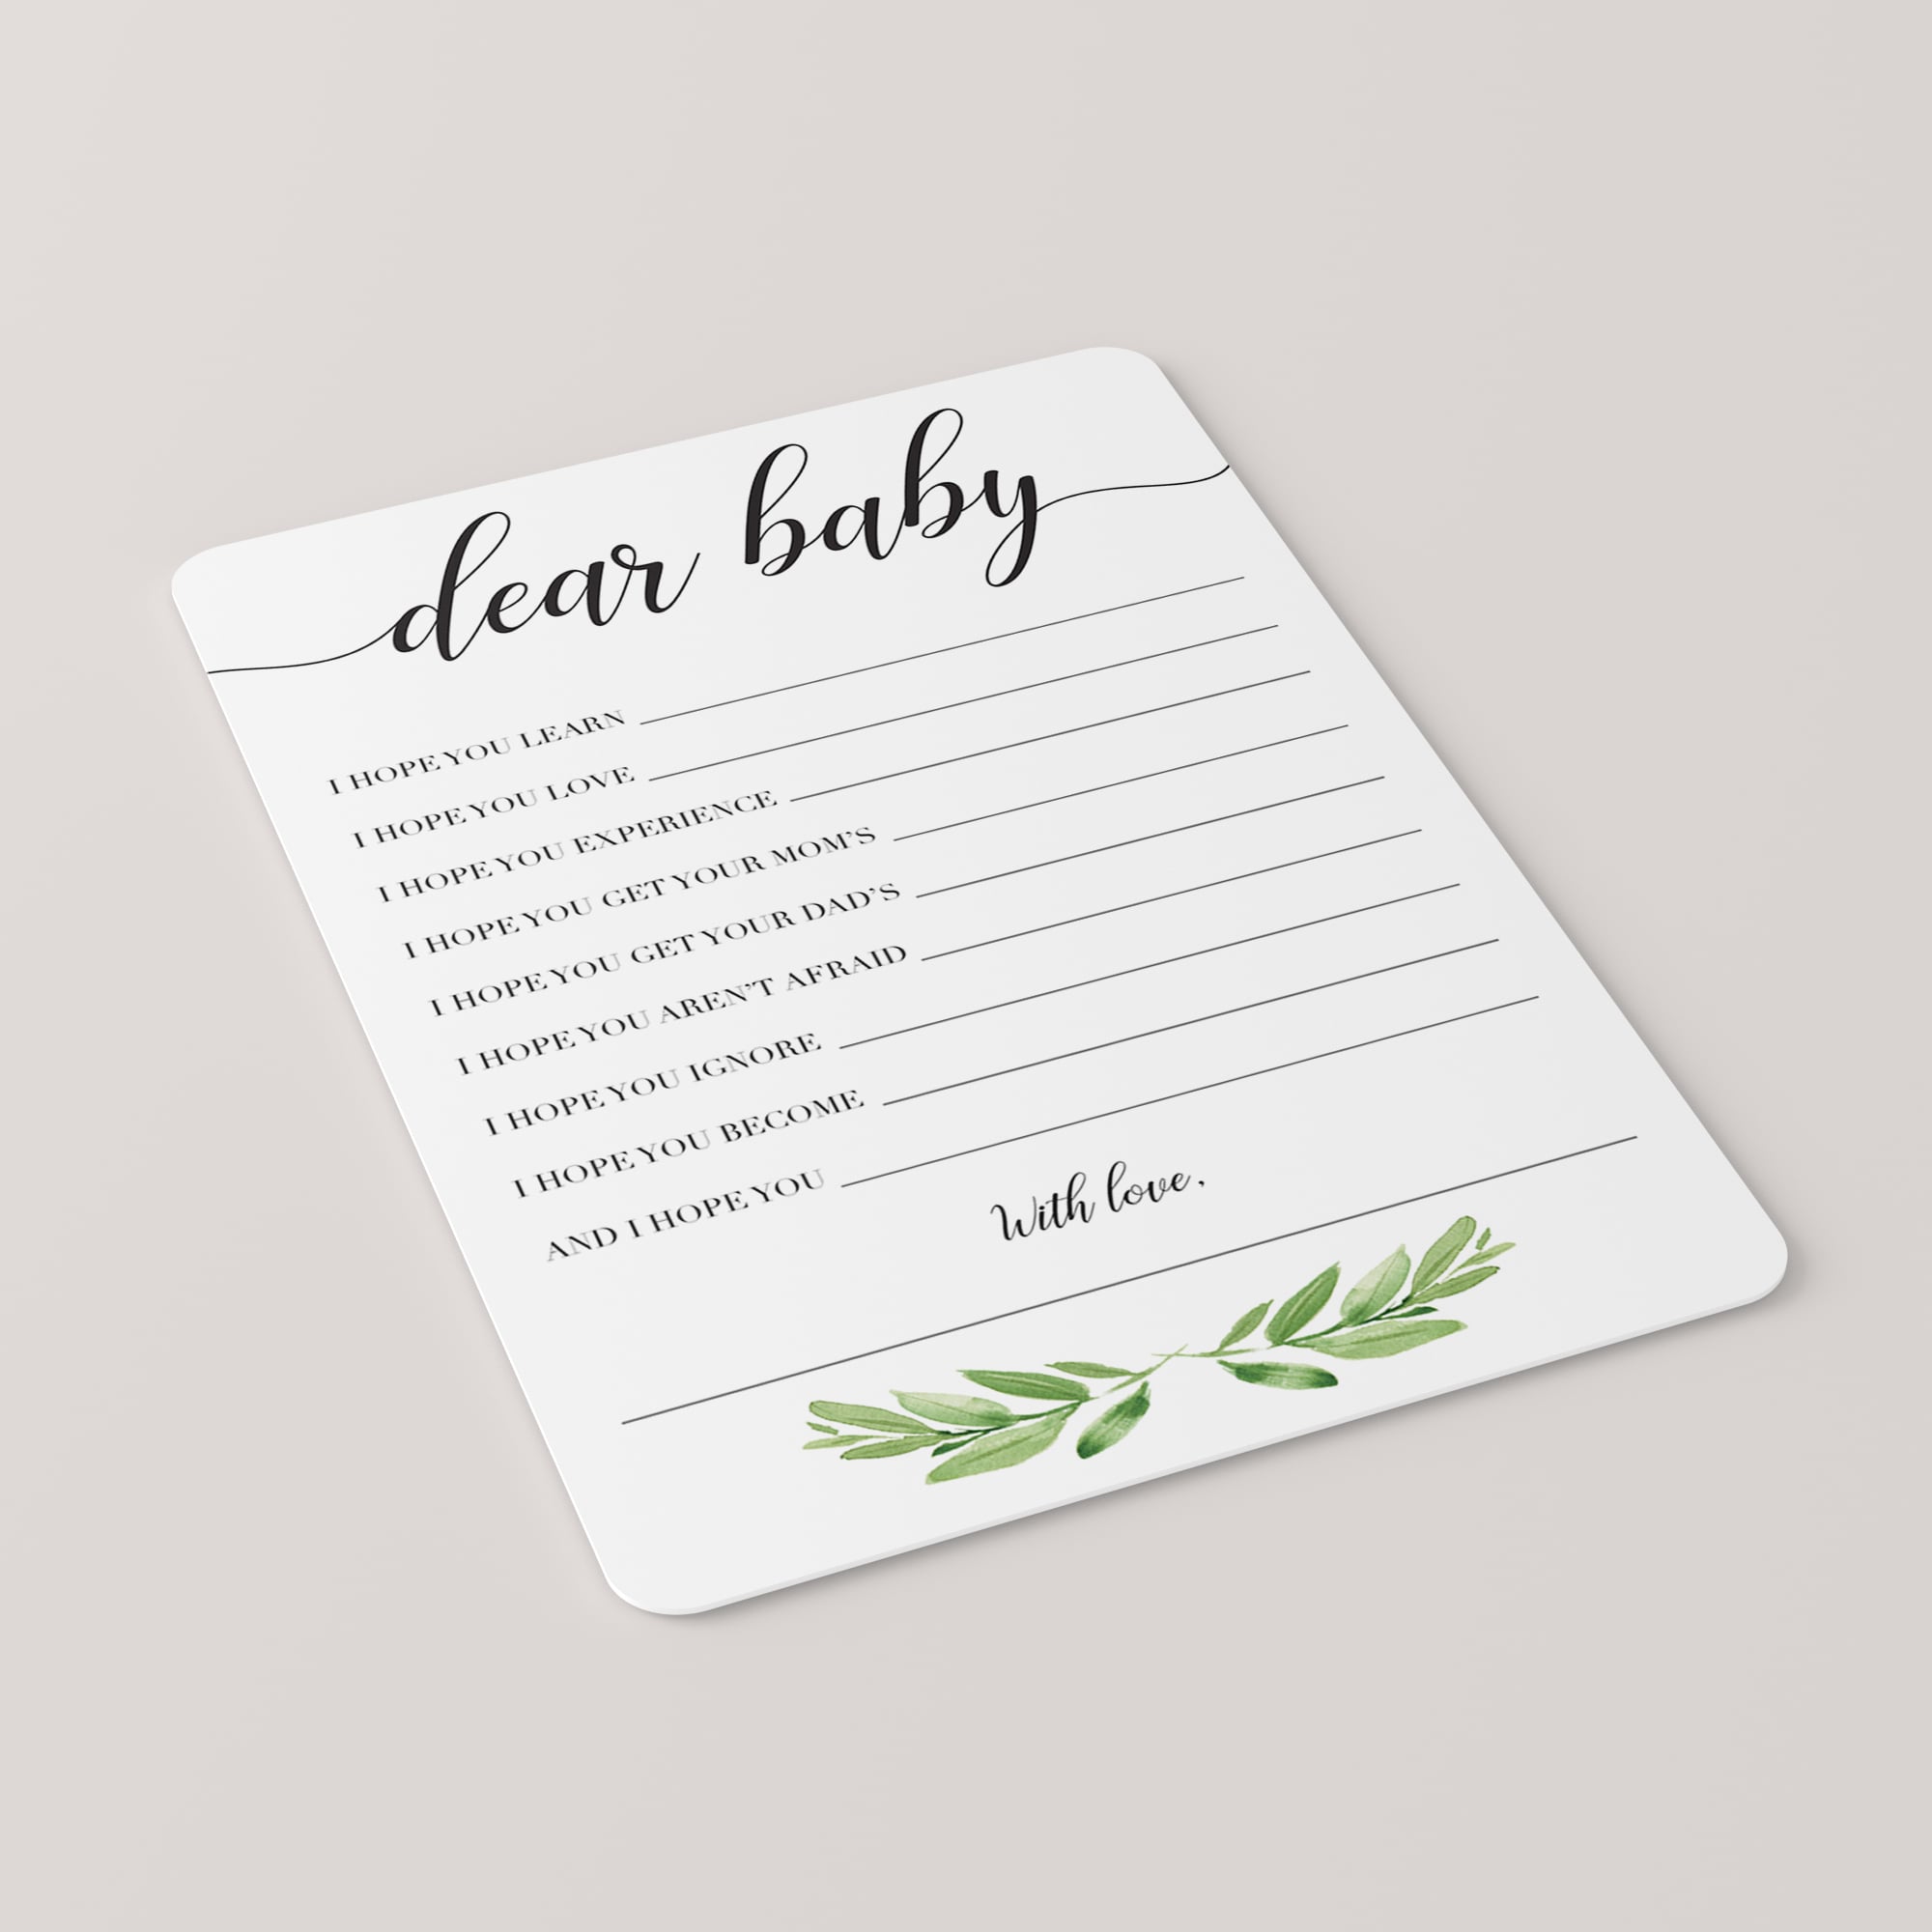 New baby wishes printable for green baby shower by LittleSizzle